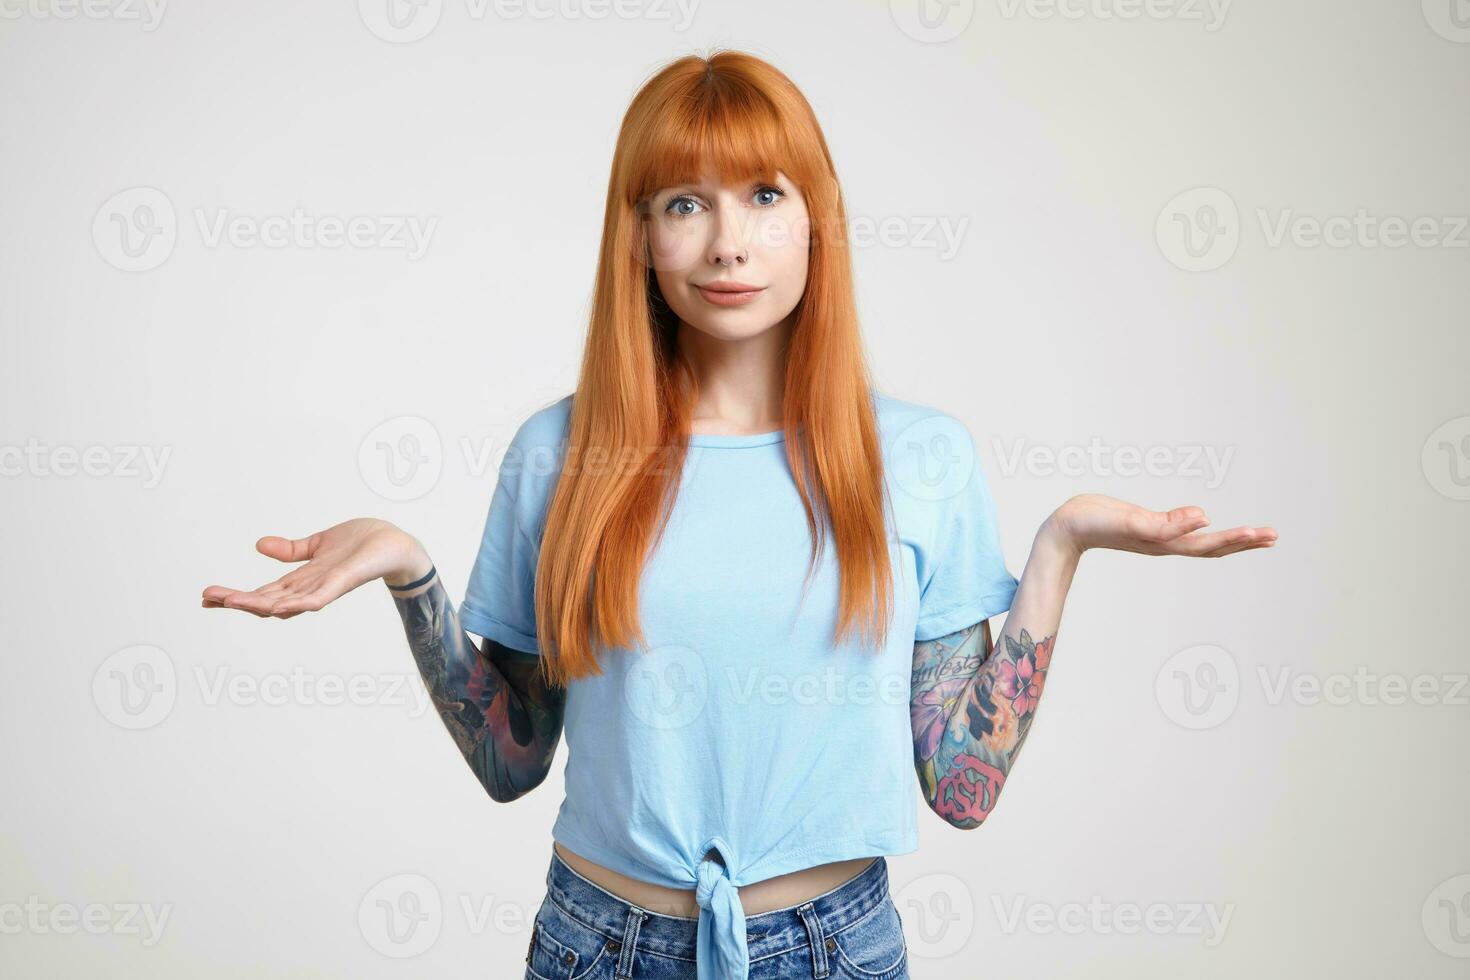 Studio photo of young long haired redhead lady with tattoos keeping her palms raised while looking confusedly at camera, isolated over white background